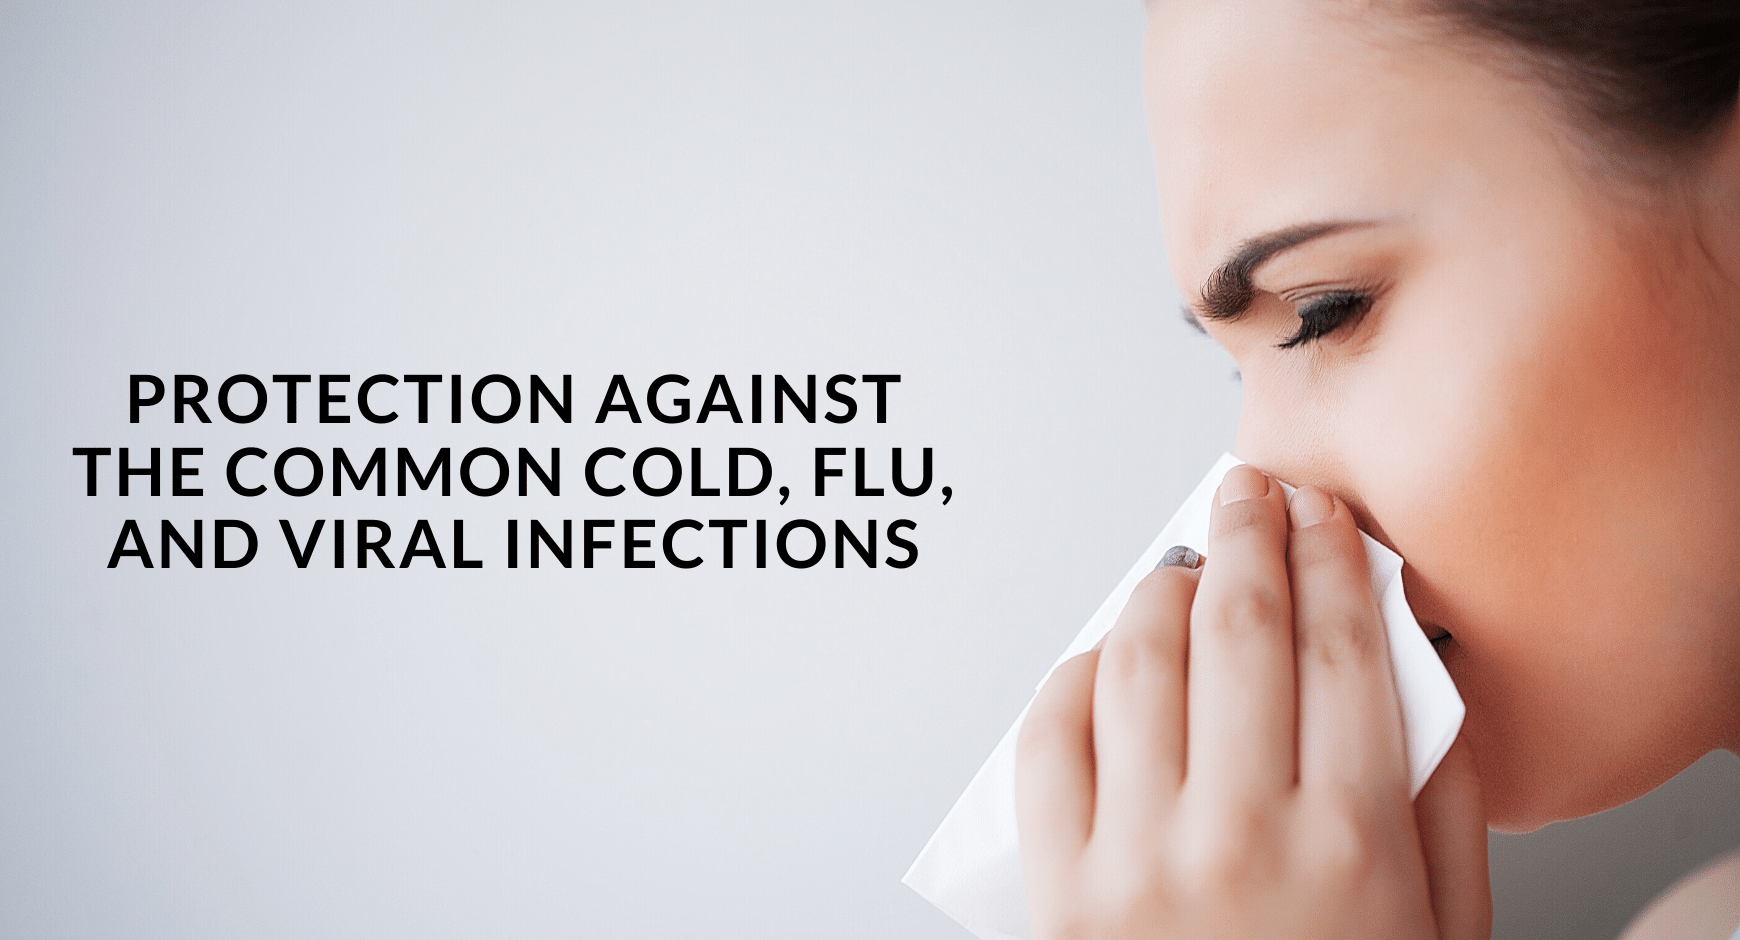 Protection against the common cold, flu, and viral infections